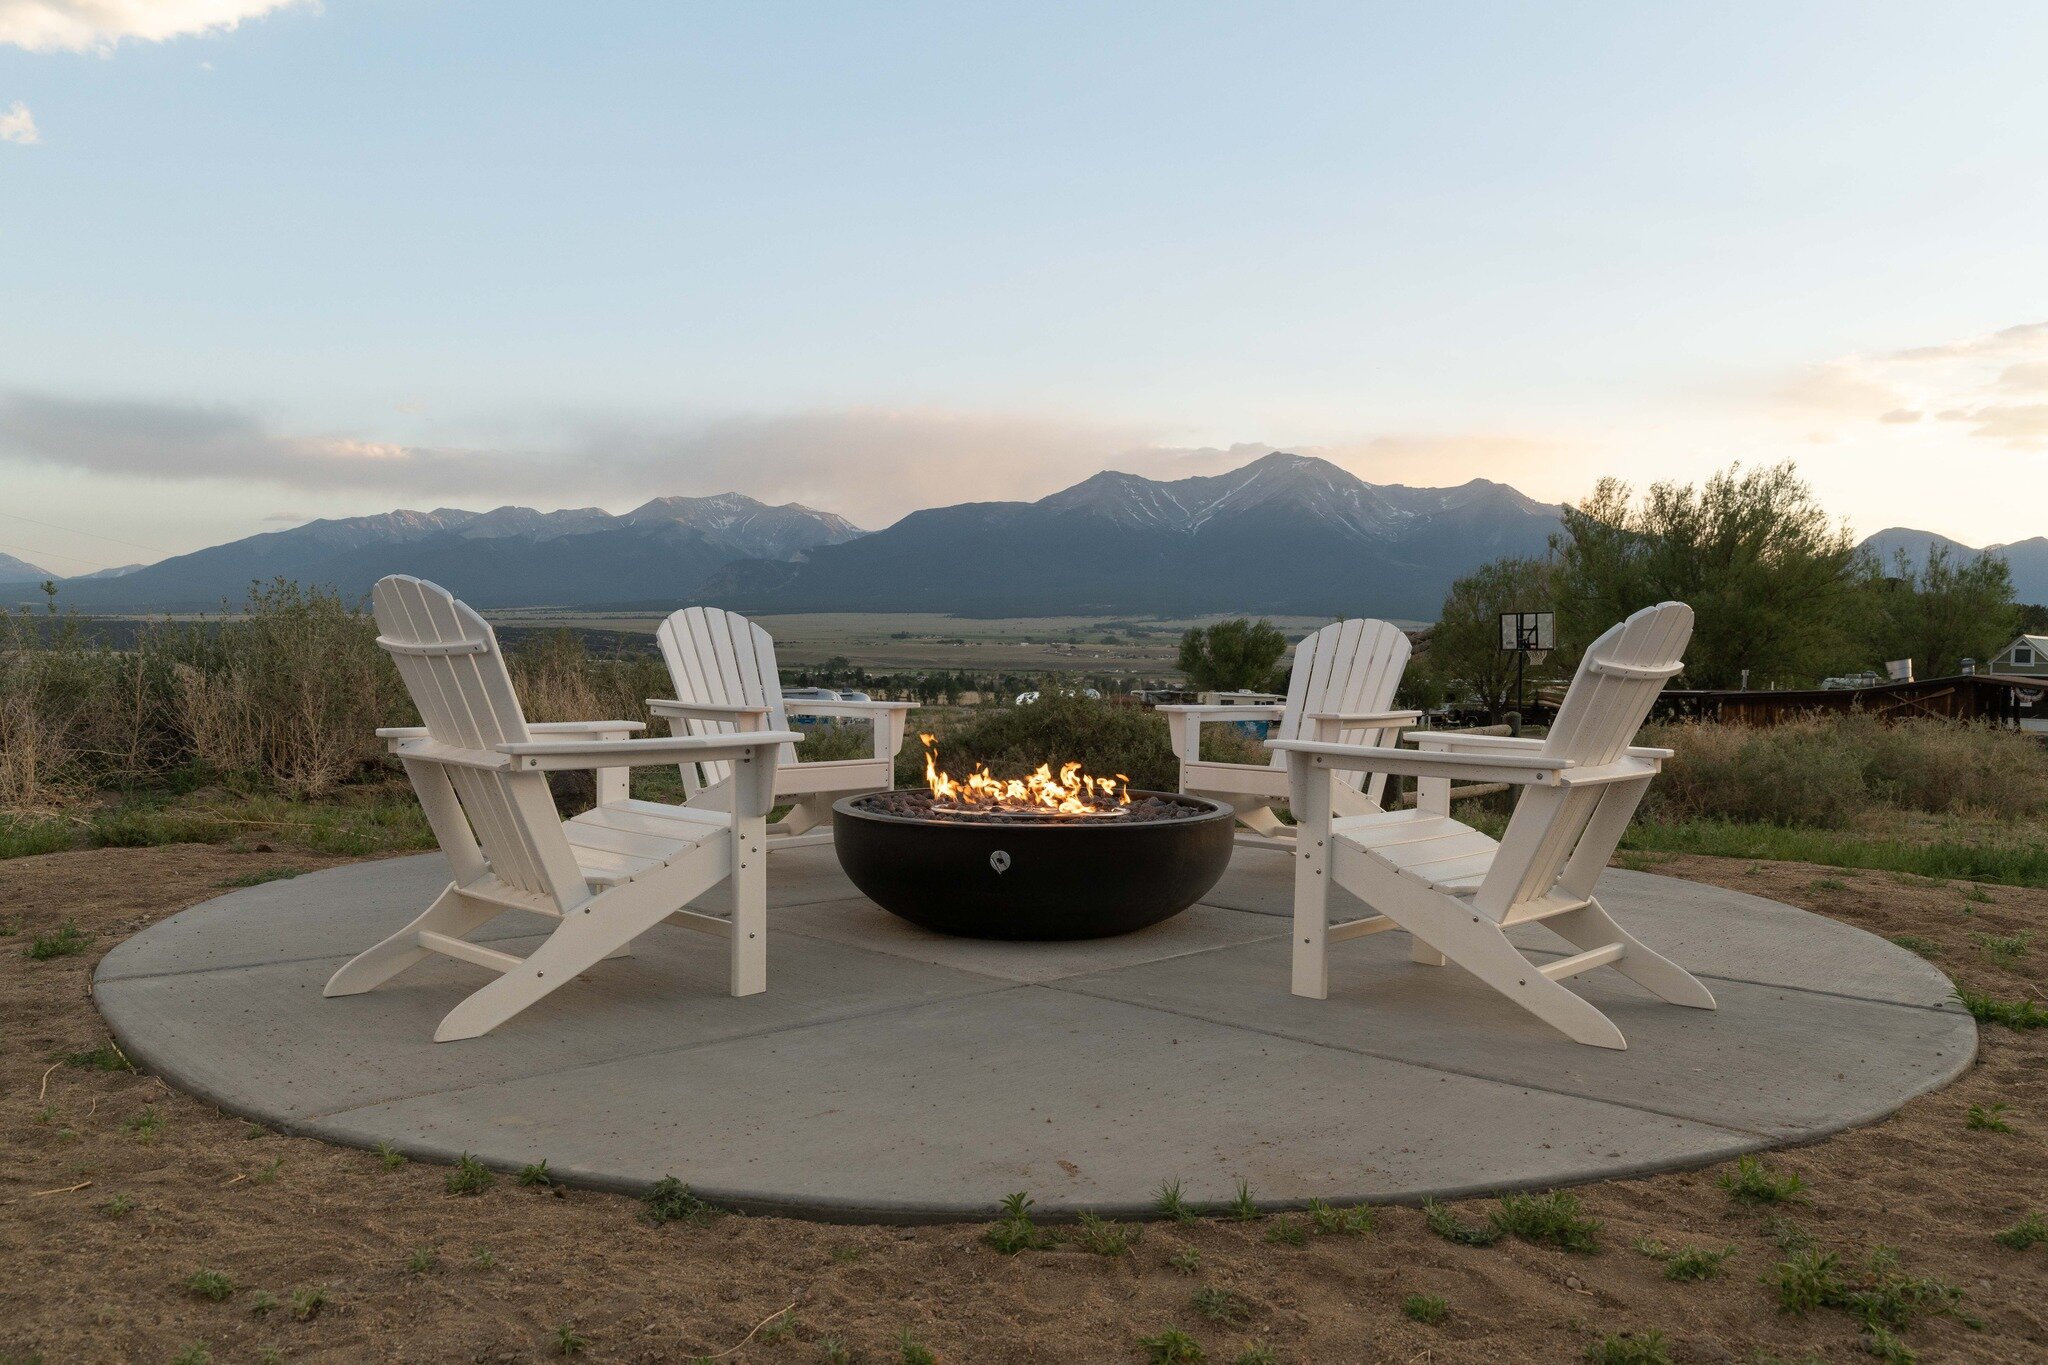 Imagine yourself here, relaxing with friends after a big day of adventure, soaking in the amazing views! Book your stay today to make your summer dreams a reality!

#BuenaVistaCO #buenavista #coloradolife #viewsfordays